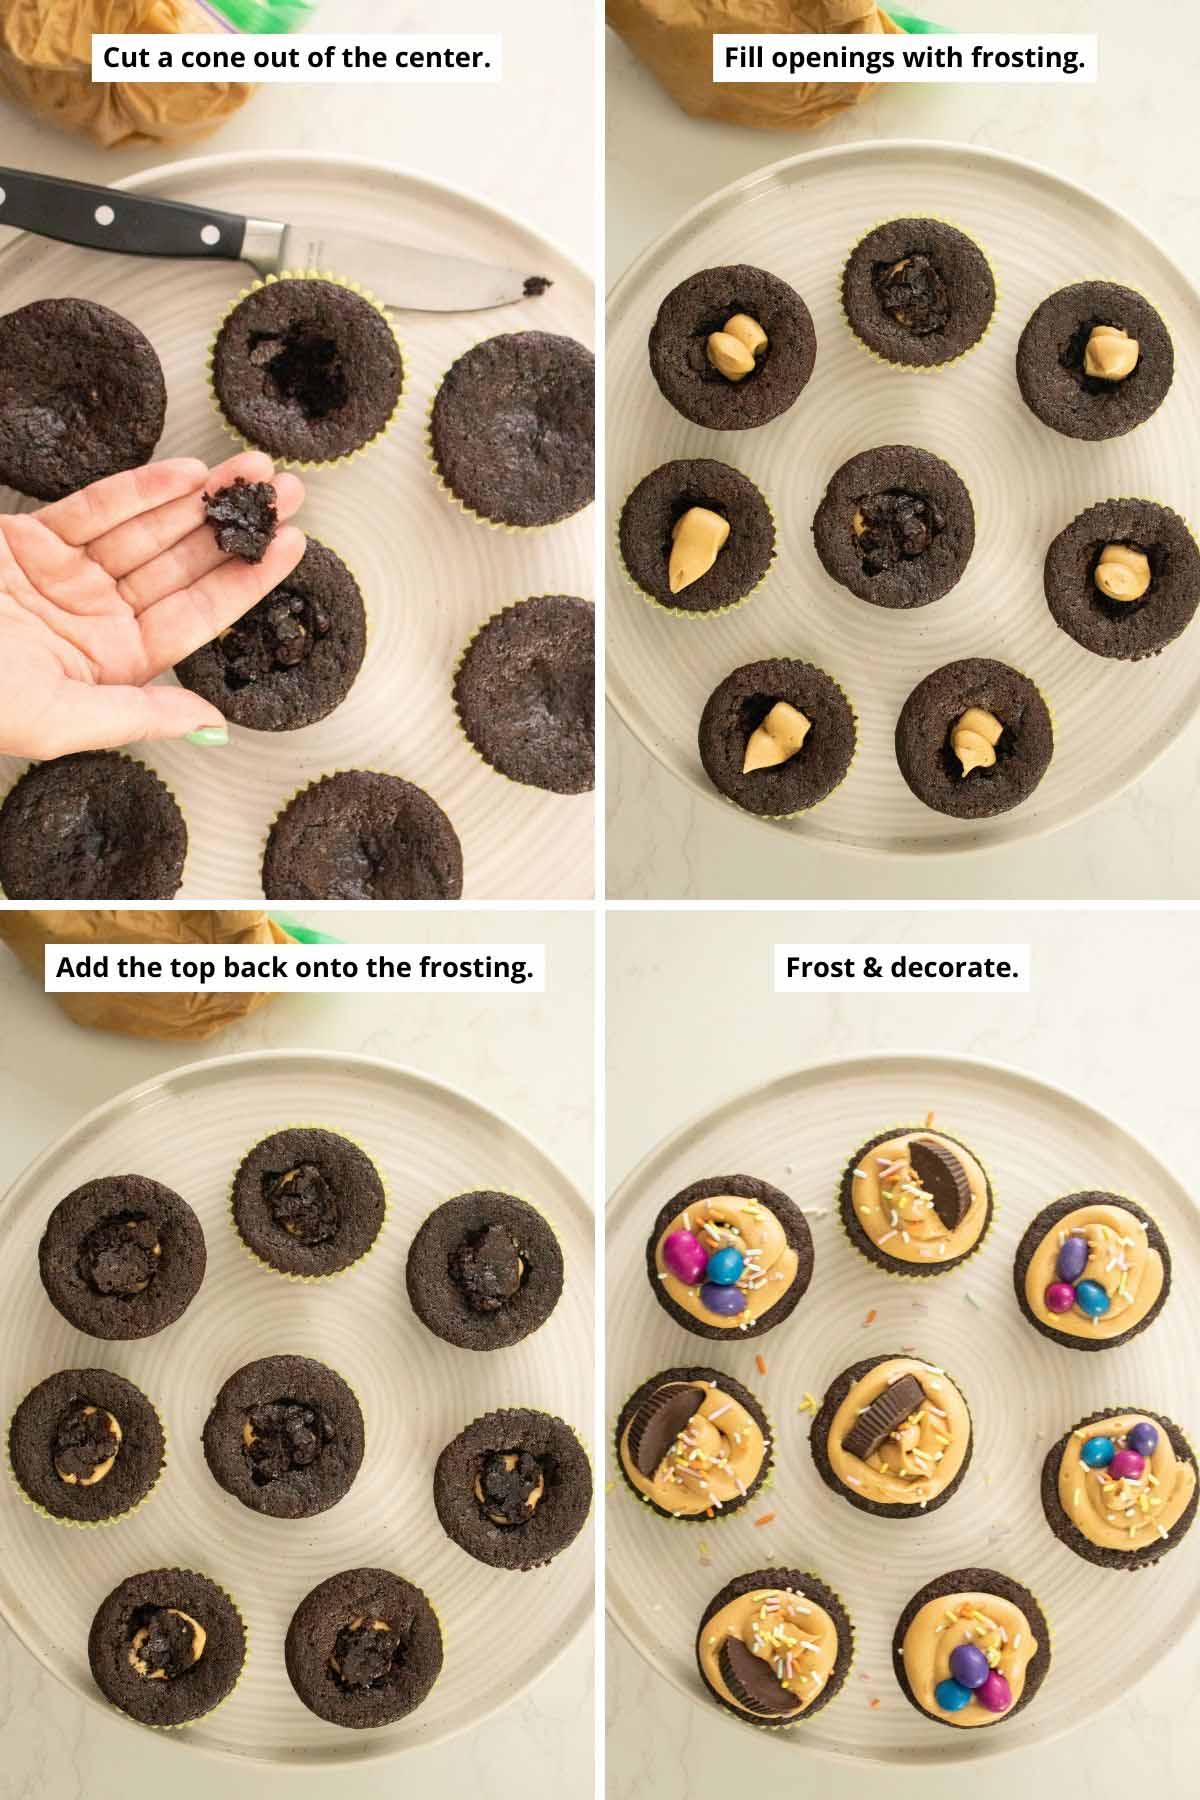 image collage showing how to cut, fill, and decorate the cupcakes